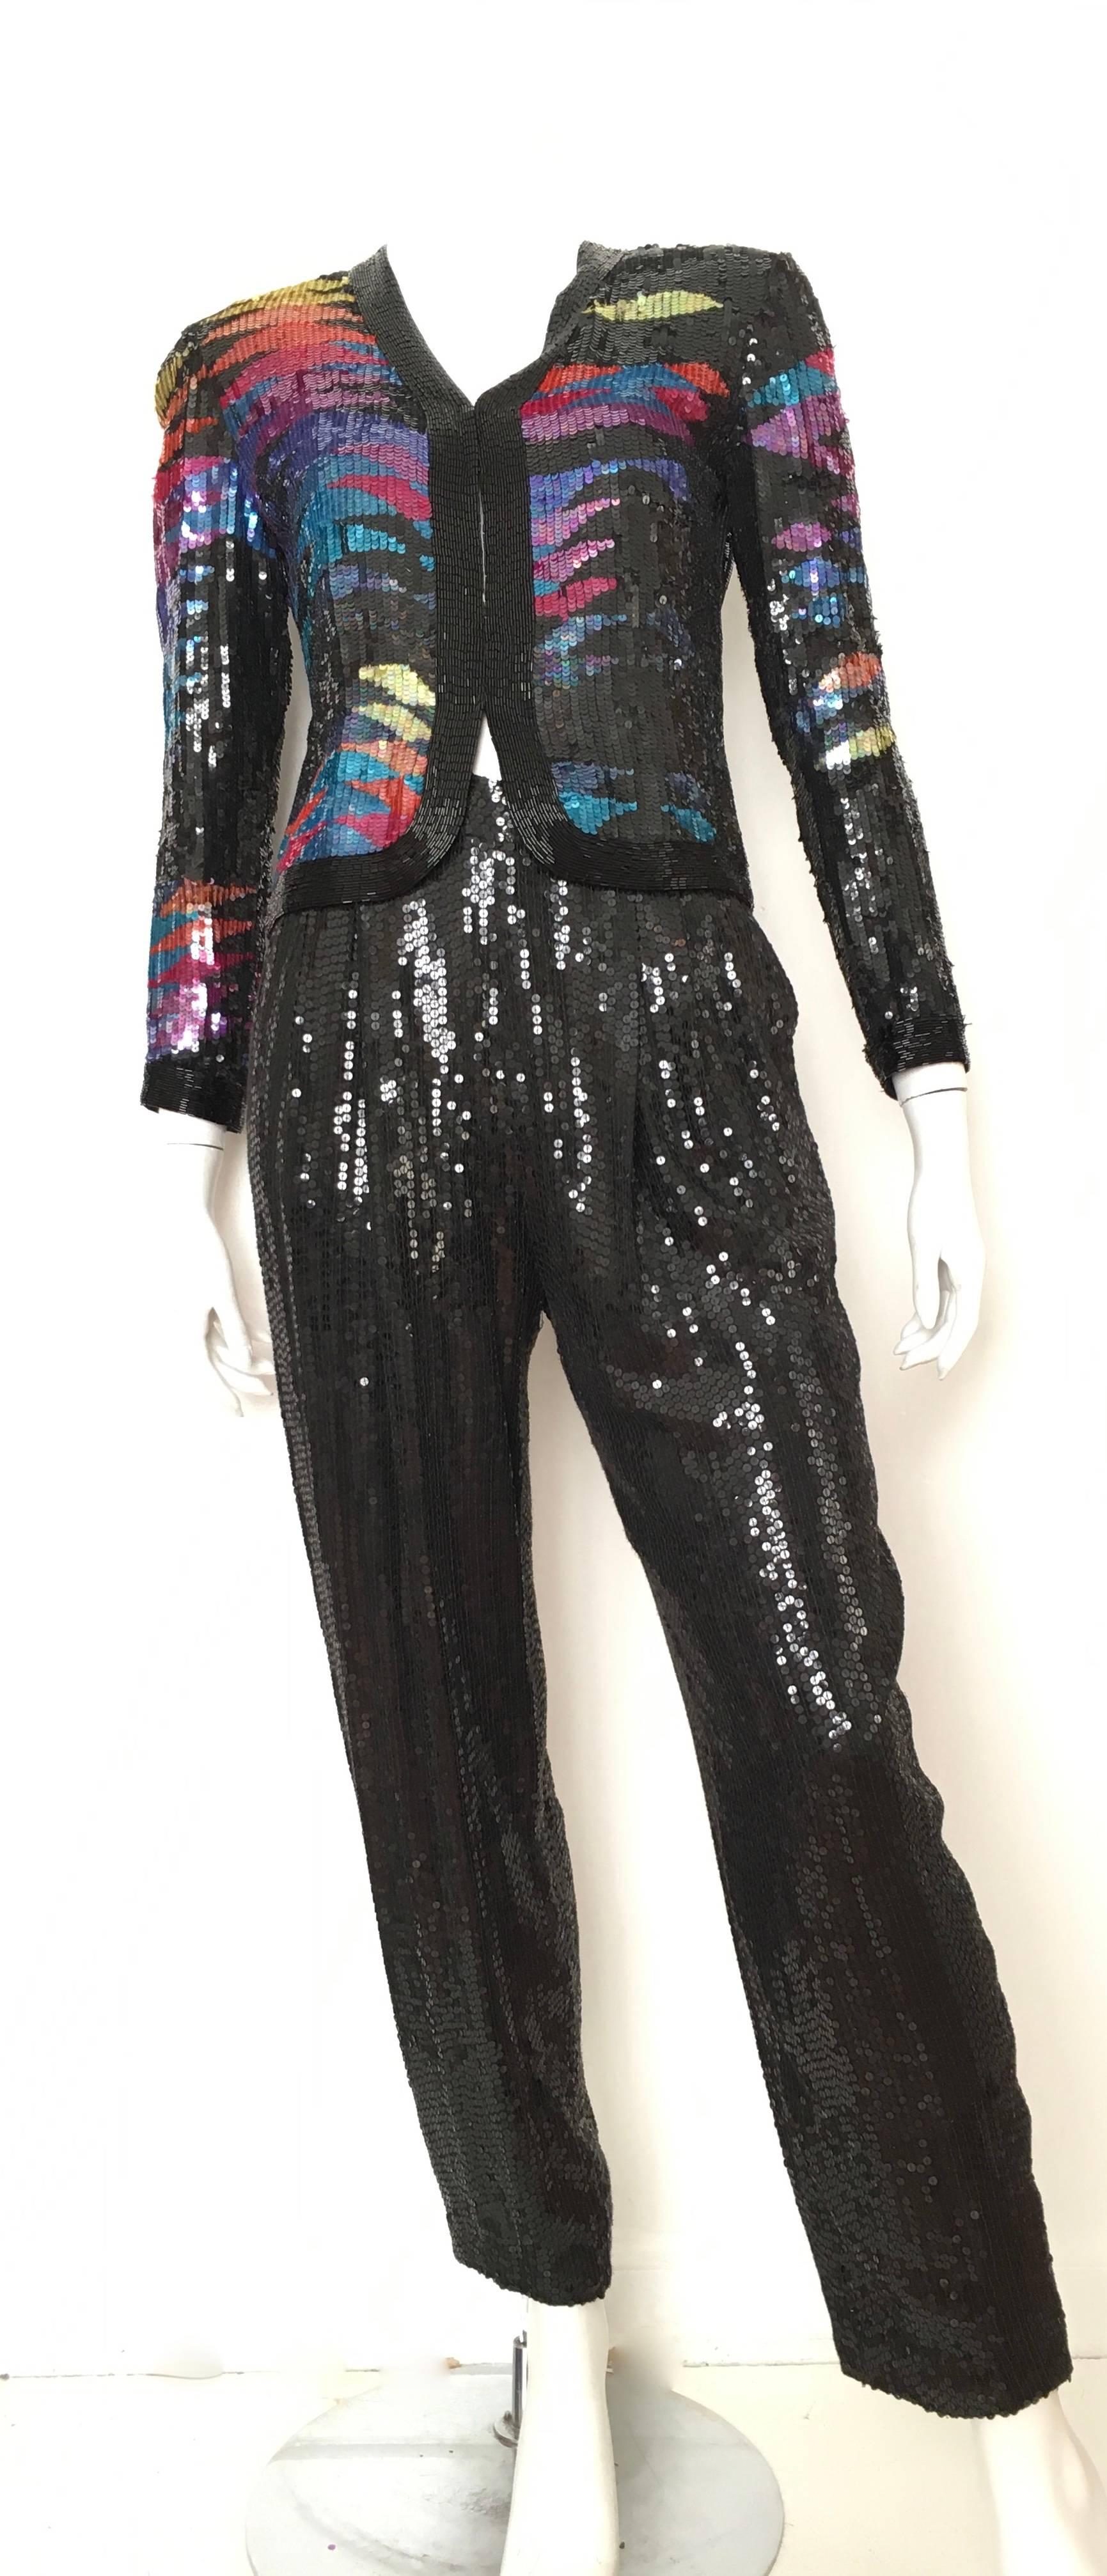 Neil Bieff for Sak's Fifth Avenue 1980s sequin jacket & pants, with pockets, suit is an USA size 4.  Ladies please grab your trusted tape measure so you can measure your bust, waist & hips to make certain this vintage treasure will fit your lovely